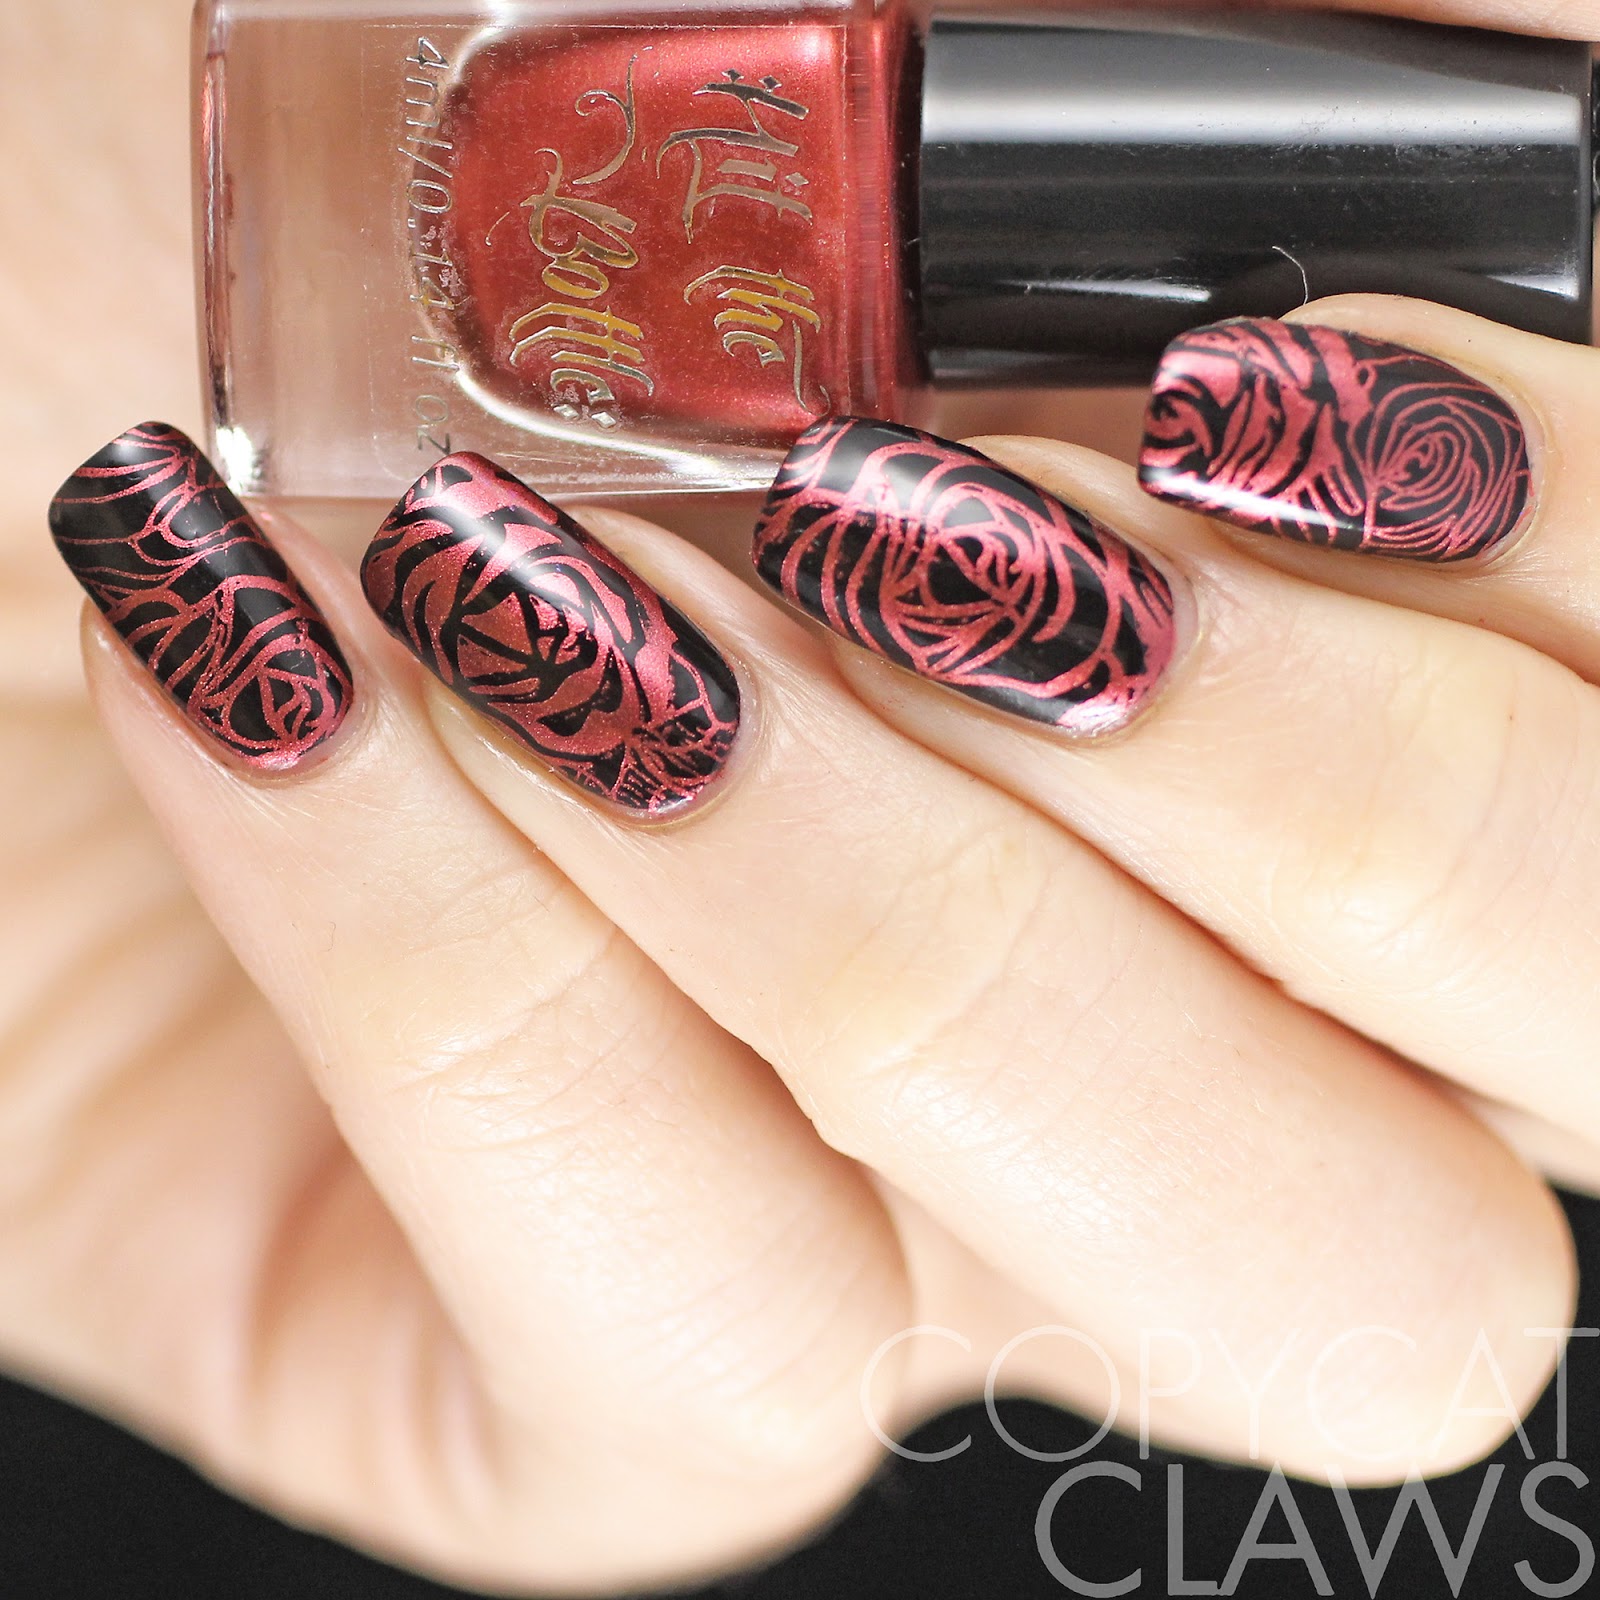 Copycat Claws: Hit The Bottle Stamping Polish Review